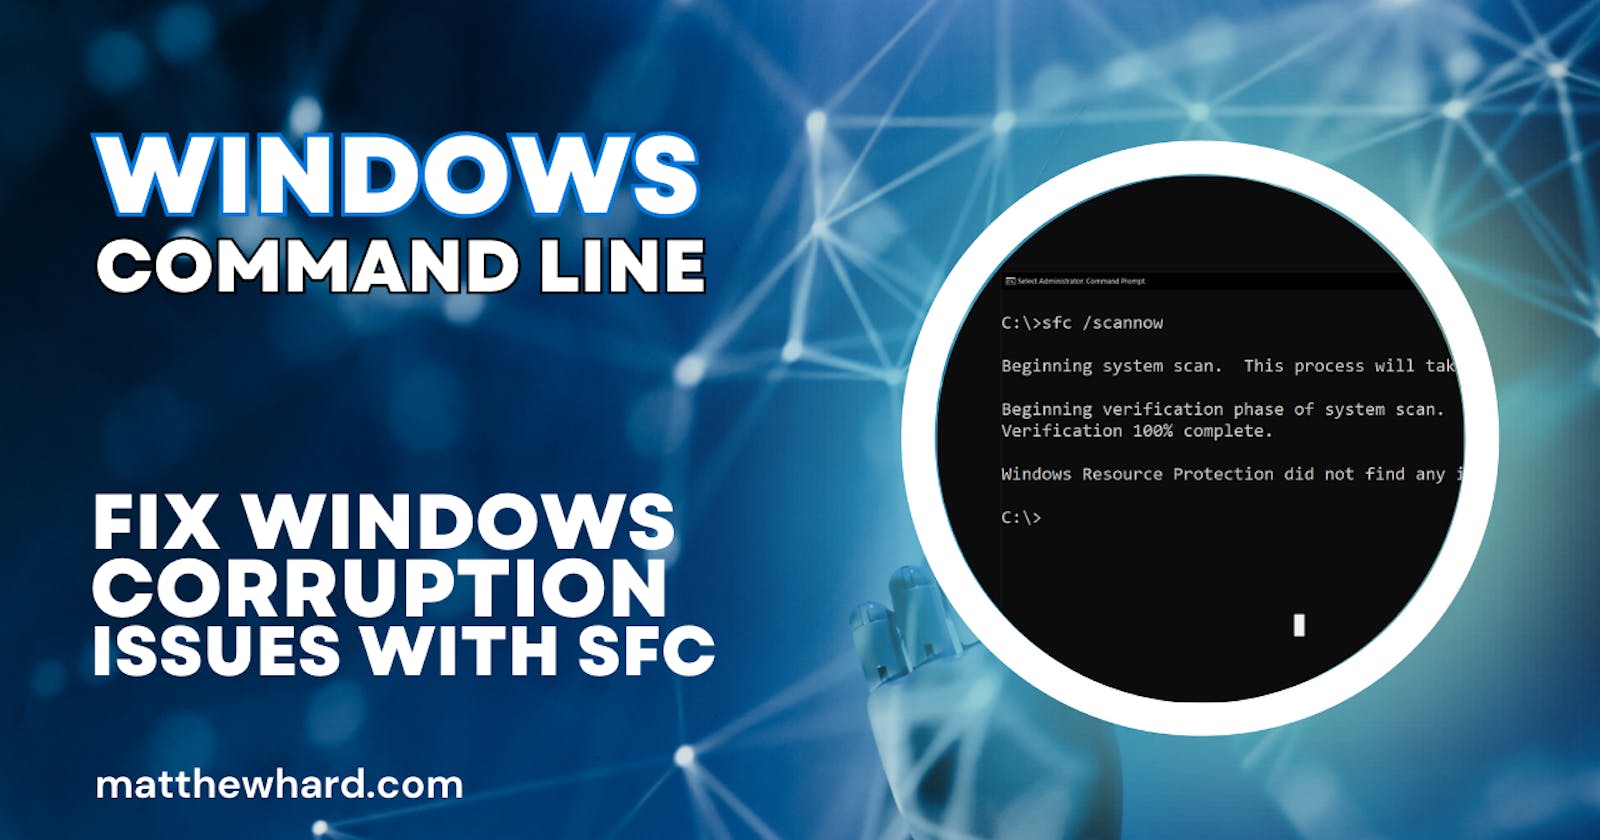 Windows Command Line: Fix Windows Corruption Issues with SFC